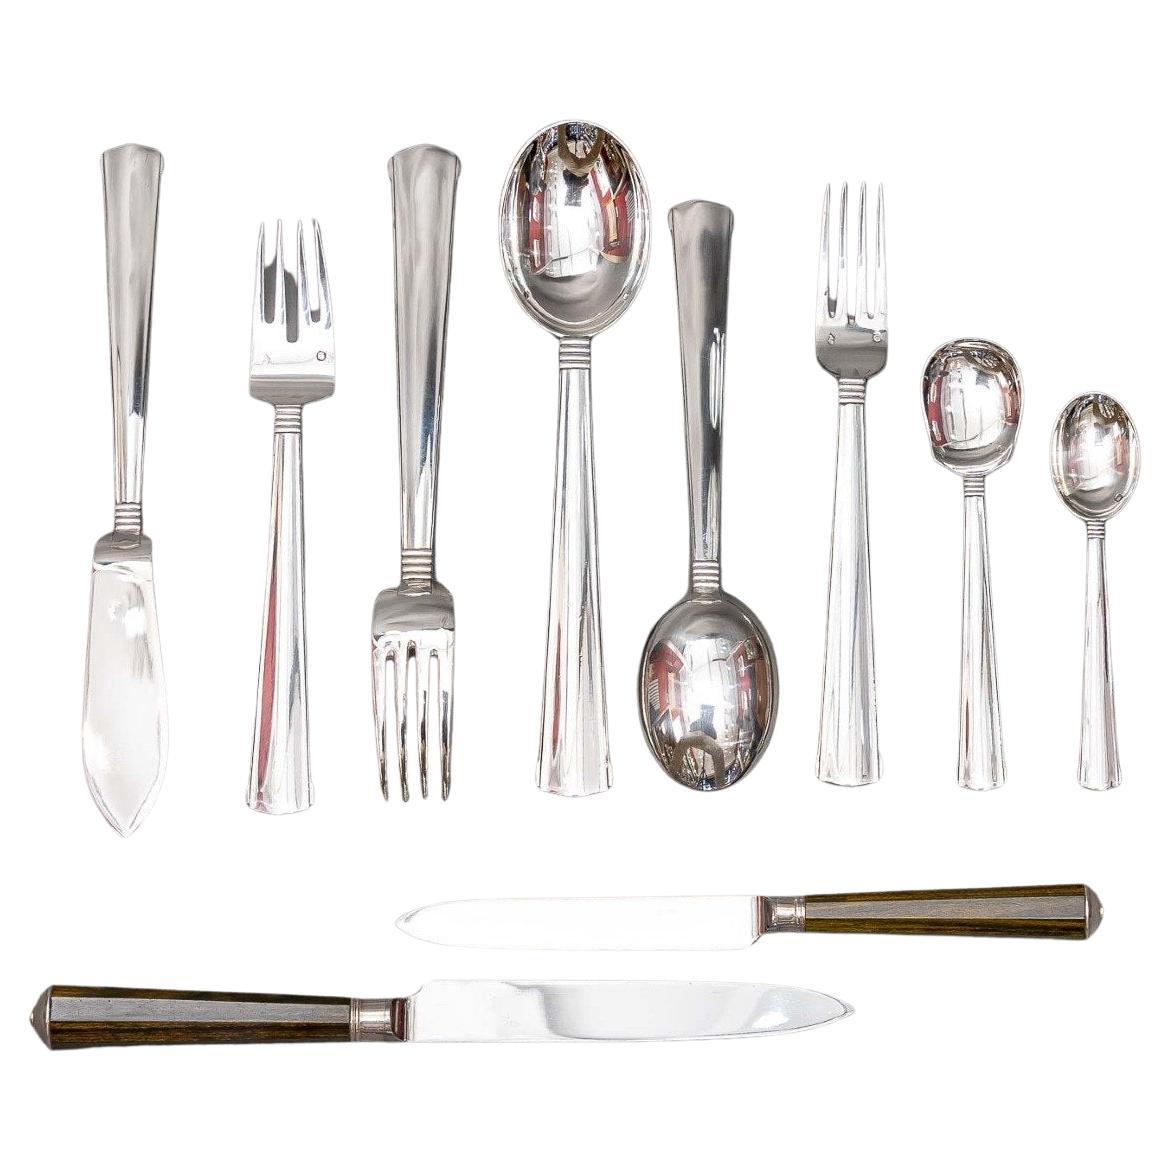 Silversmith R. Linzeler & Peters - silver cutlery set 125 pieces circa 1930 For Sale